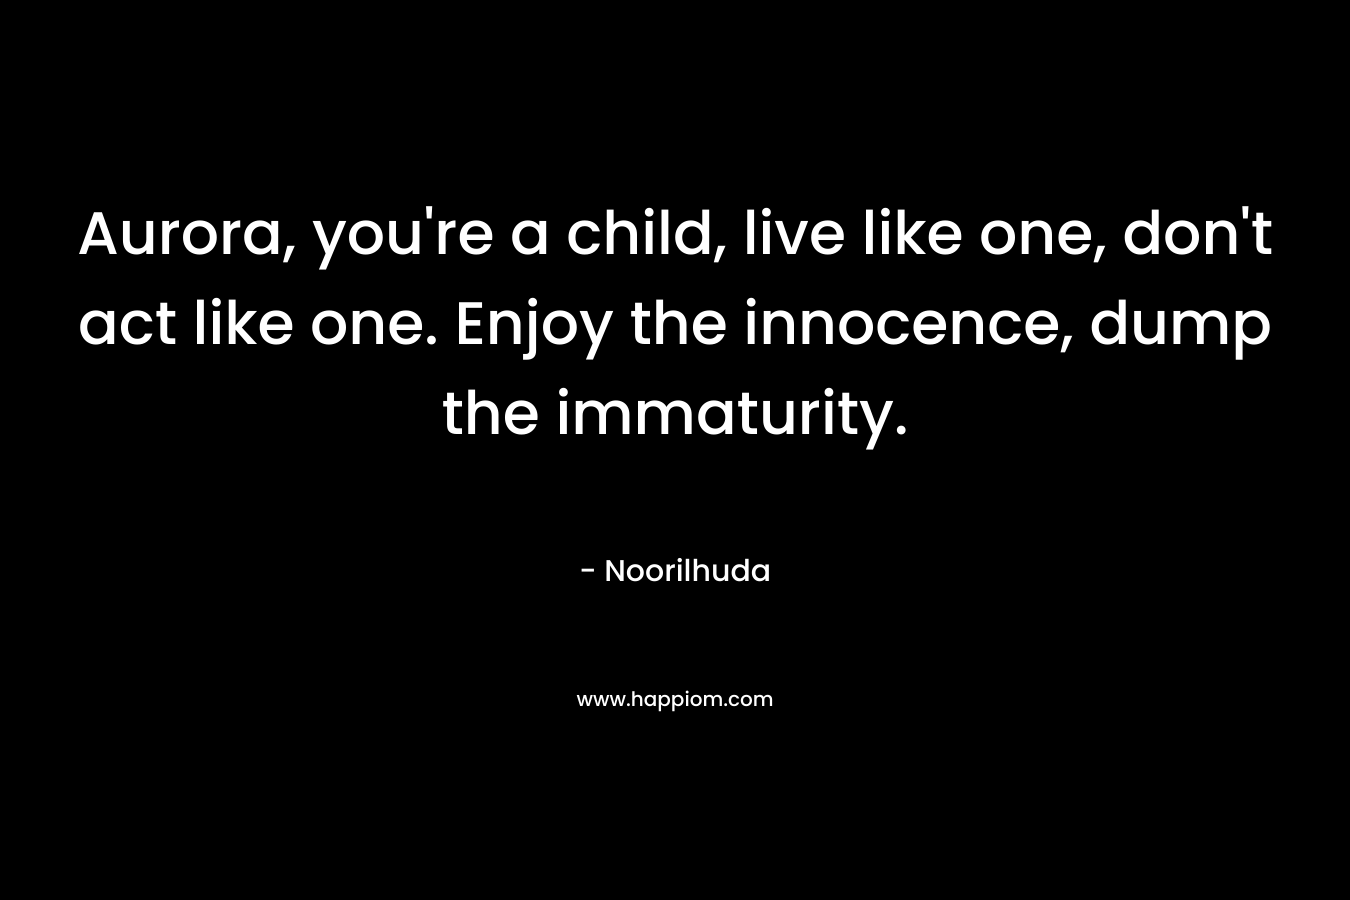 Aurora, you’re a child, live like one, don’t act like one. Enjoy the innocence, dump the immaturity. – Noorilhuda